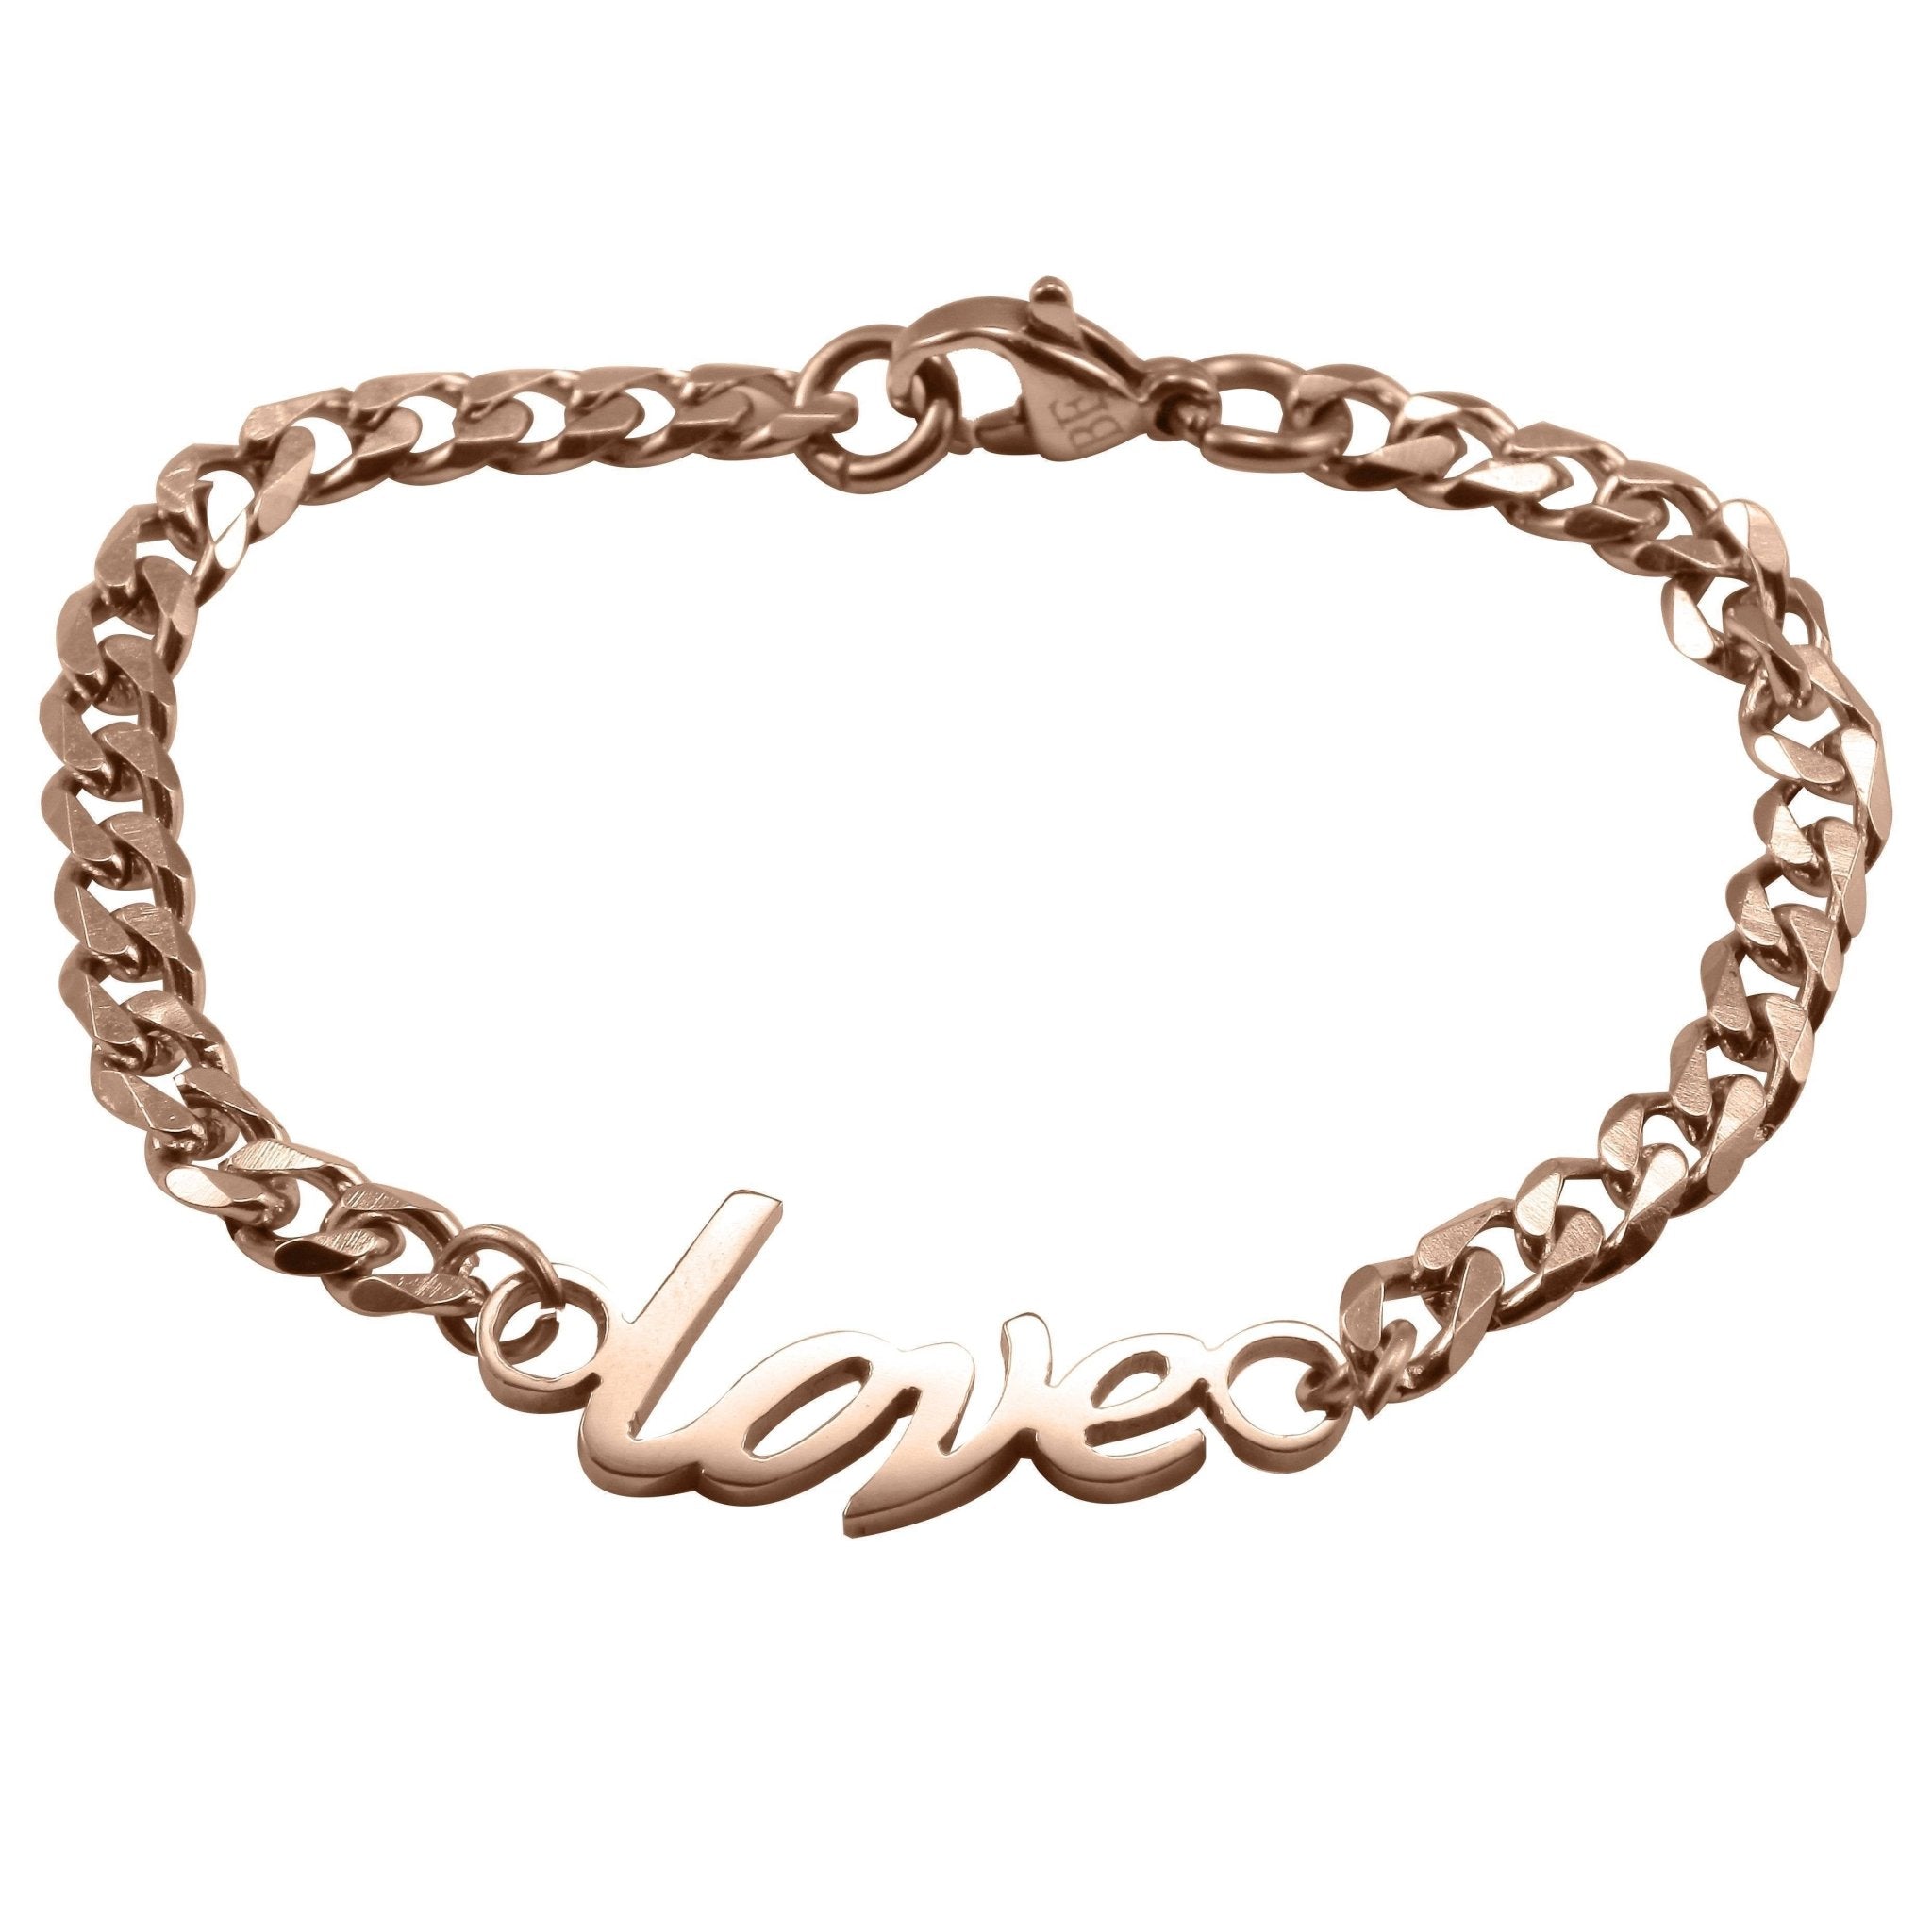 Customized Stainless Steel Charm Bracelet 10MM Cuban Chain, Personalized  Name & Family Gift For Women/Men From Jia05, $15.35 | DHgate.Com